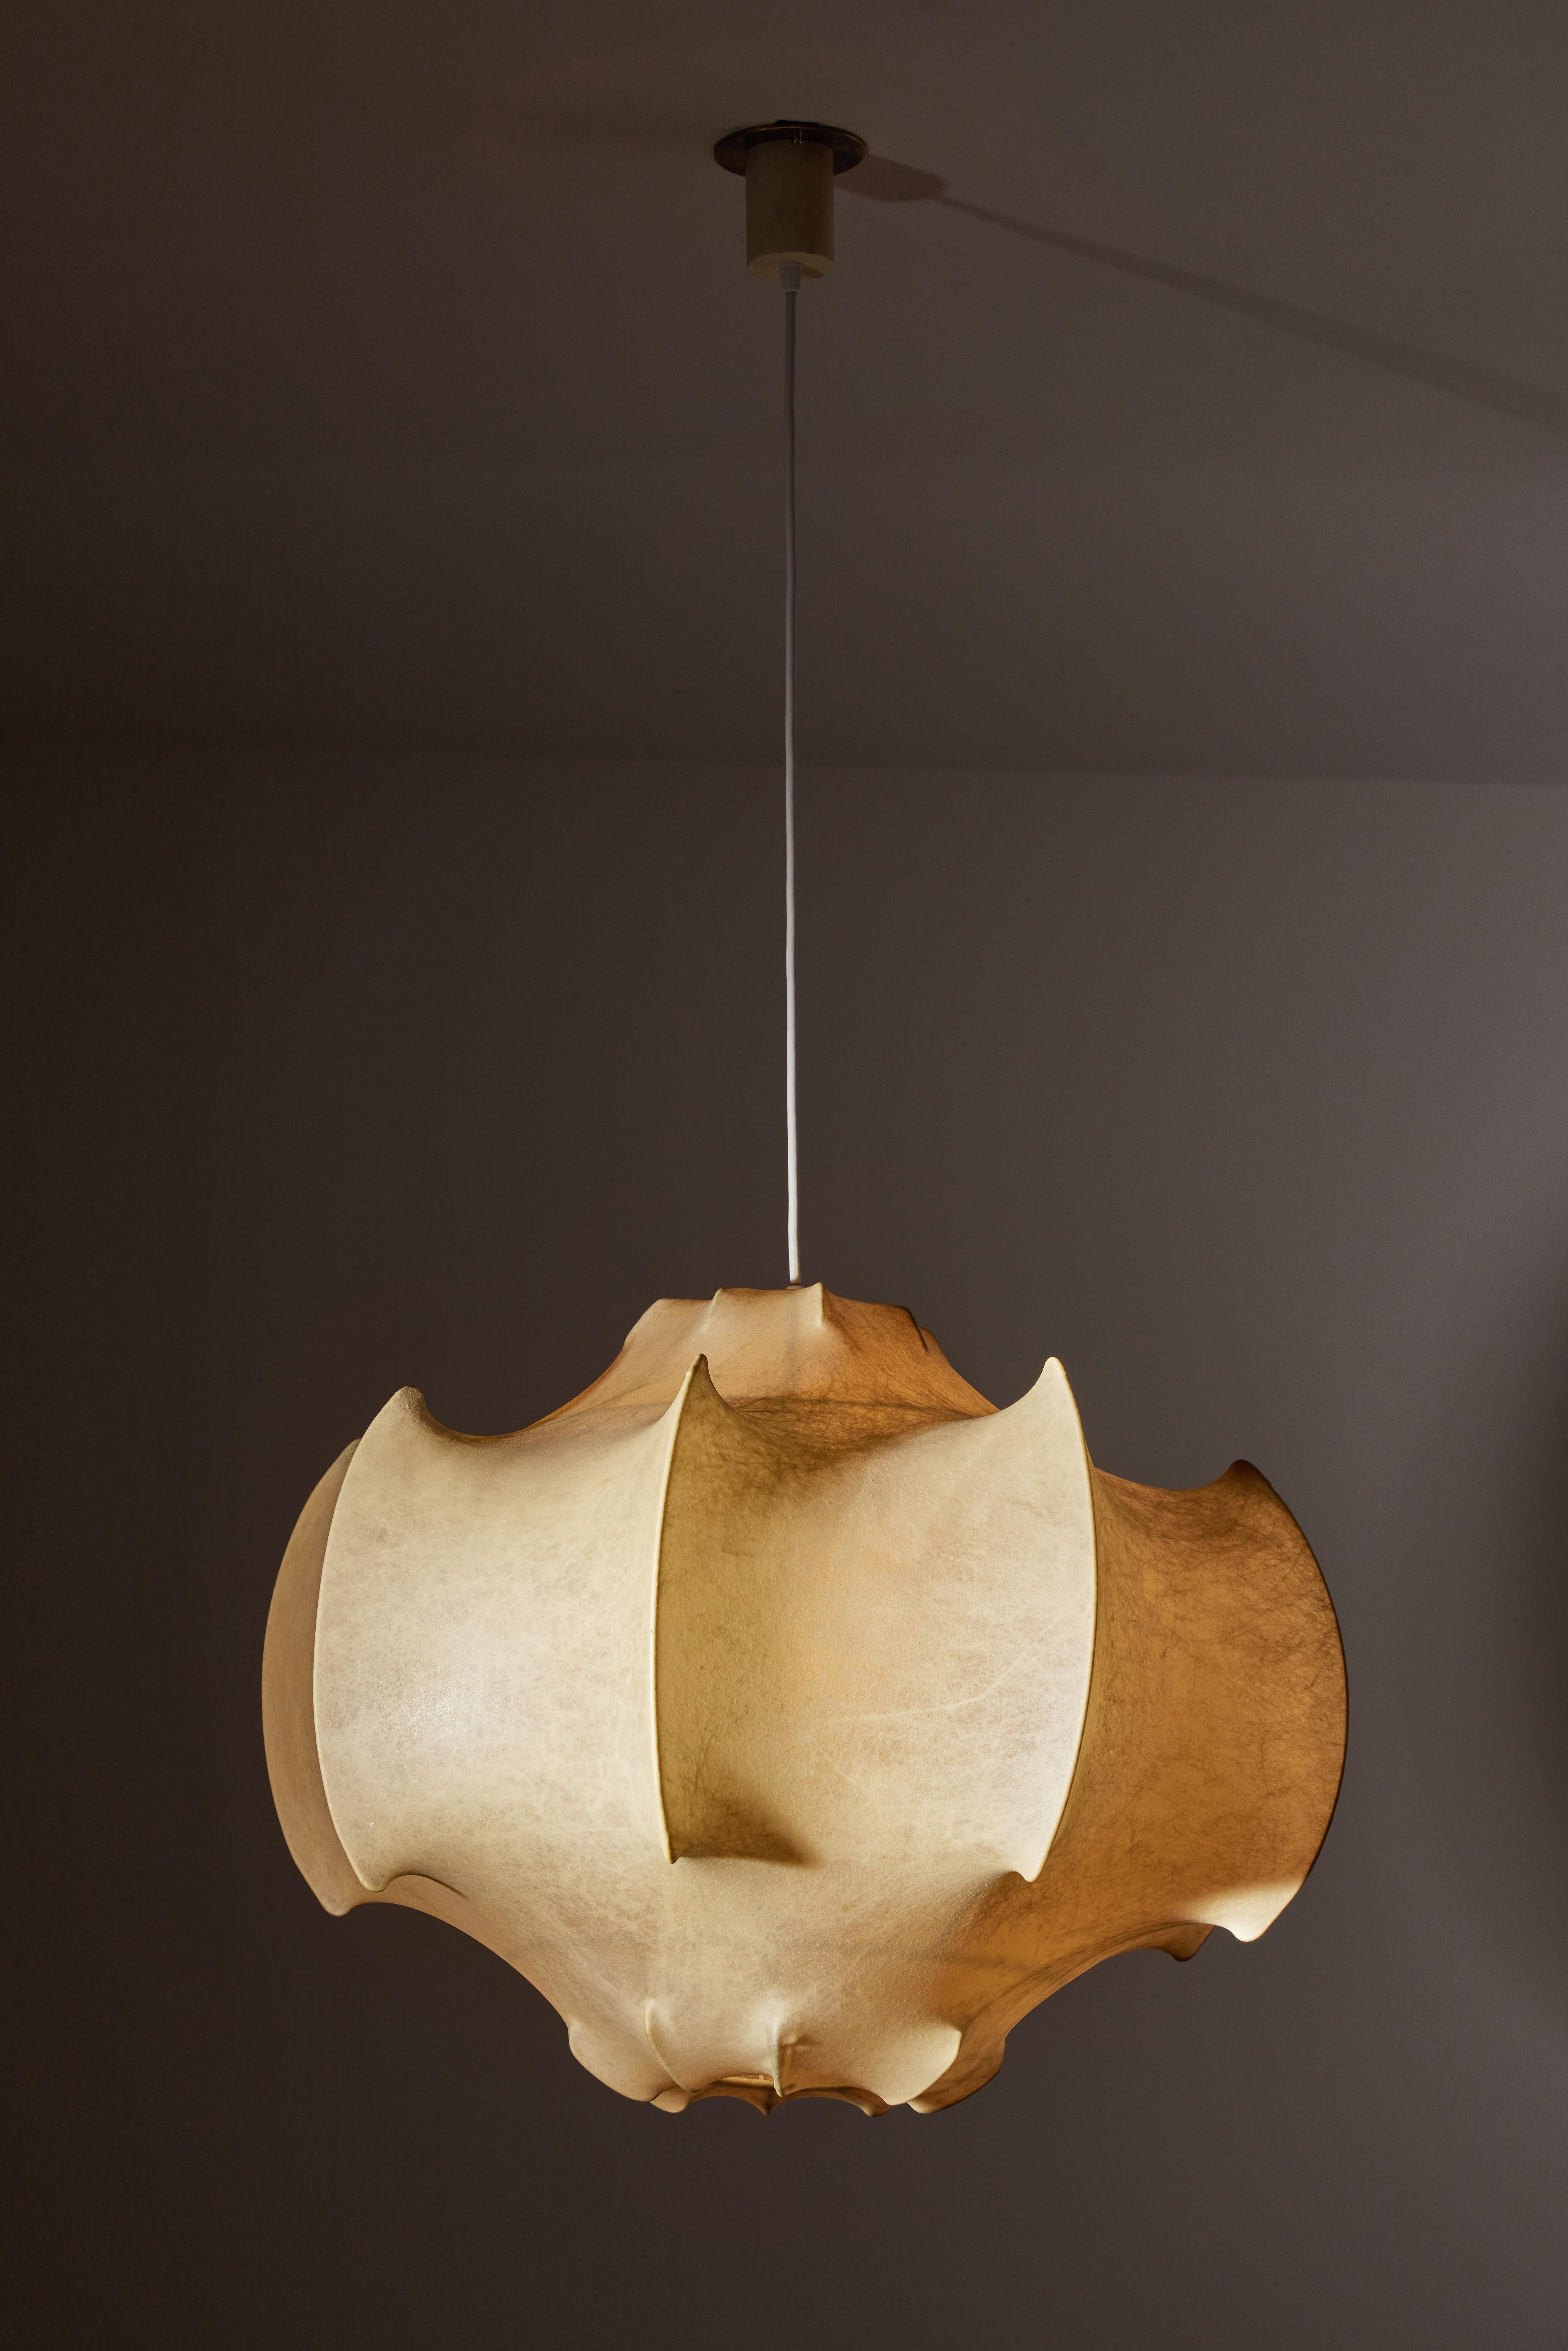 Original Viscontea suspension light by Achille & Pier Giacomo Castiglioni for Flos. Designed and manufactured in Italy, circa 1960s. Plastic polymer resin applied with spraying technique on to a painted metal frame. Rewired for U.S. junction boxes.